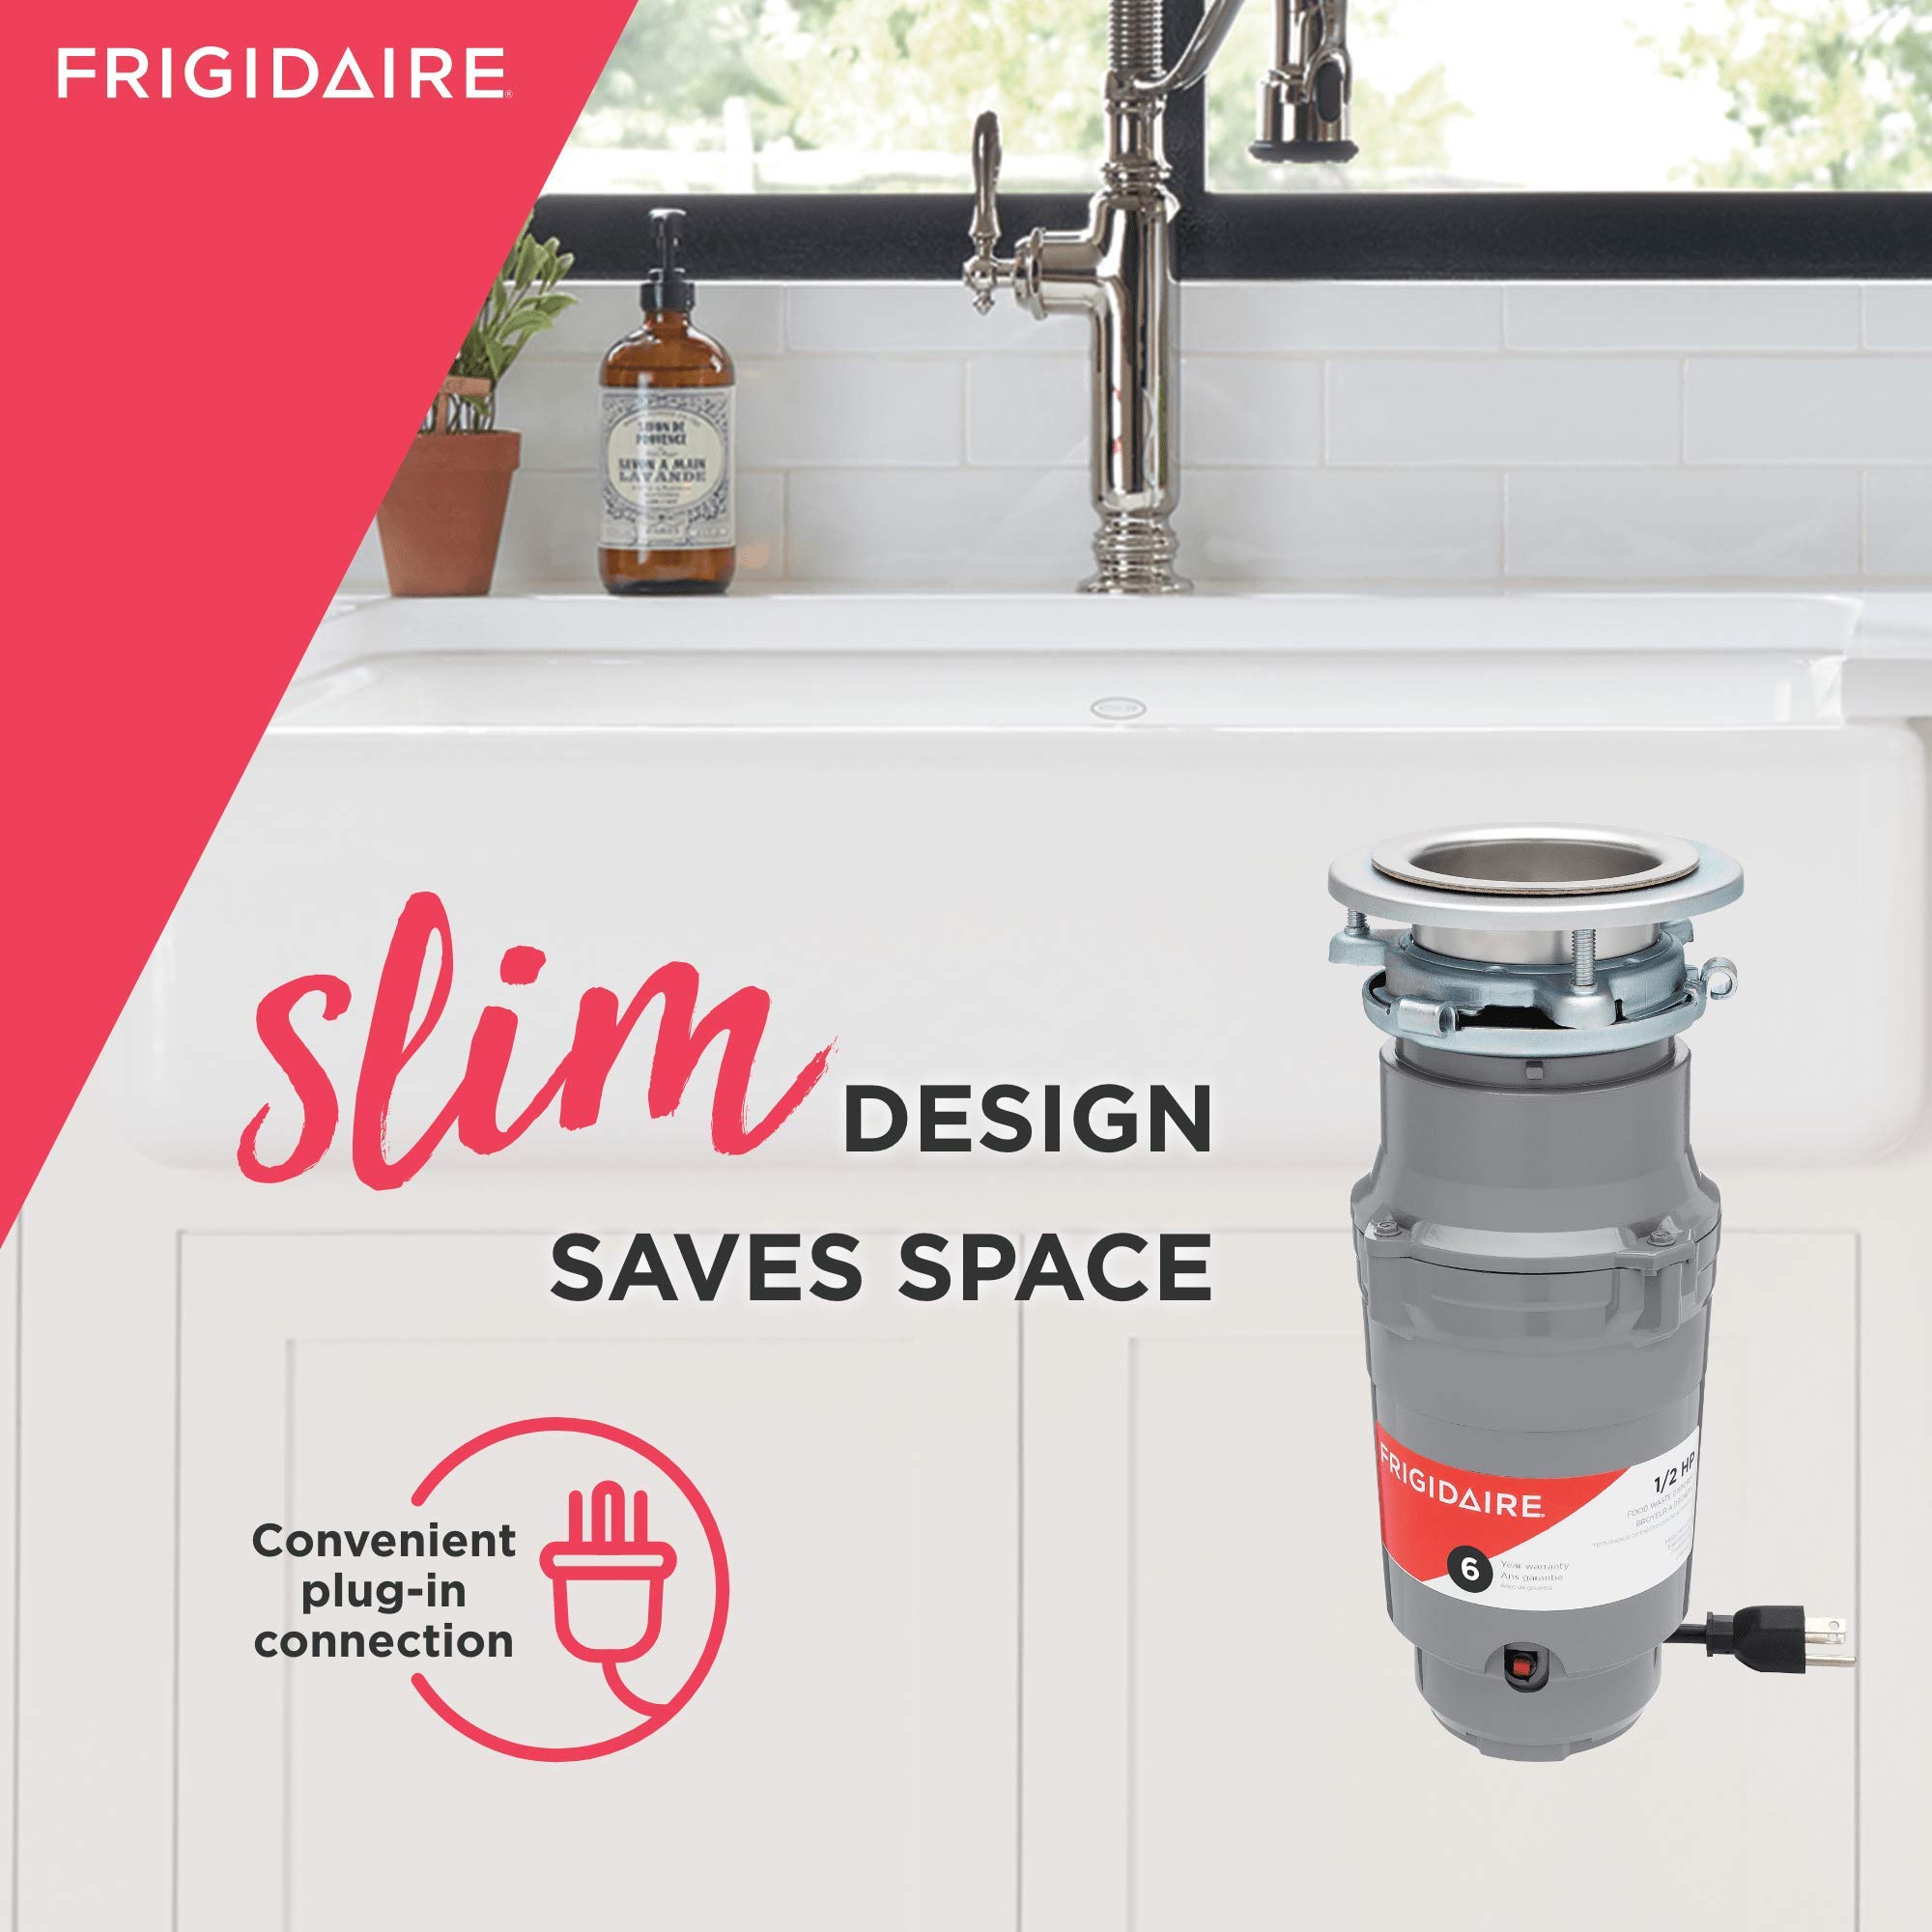 Frigidaire 1/2 HP Corded Garbage Disposal for Kitchen Sinks | FF05DISPC1